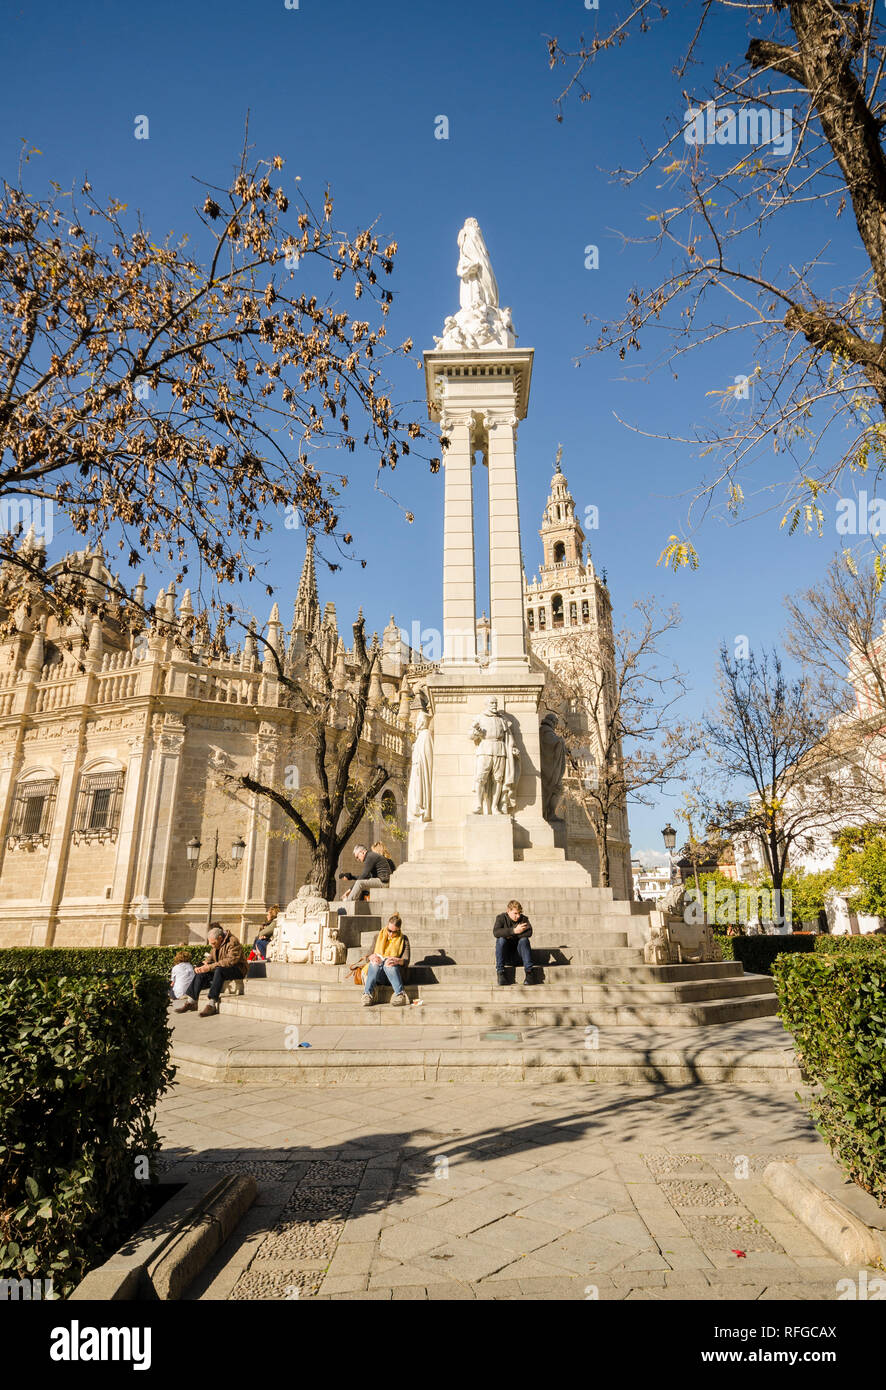 Monument of the Immaculate Conception, Monumento a la Inmaculada Concepcion, Plaza del Triunfo near Seville Cathedral Seville, Spain Stock Photo